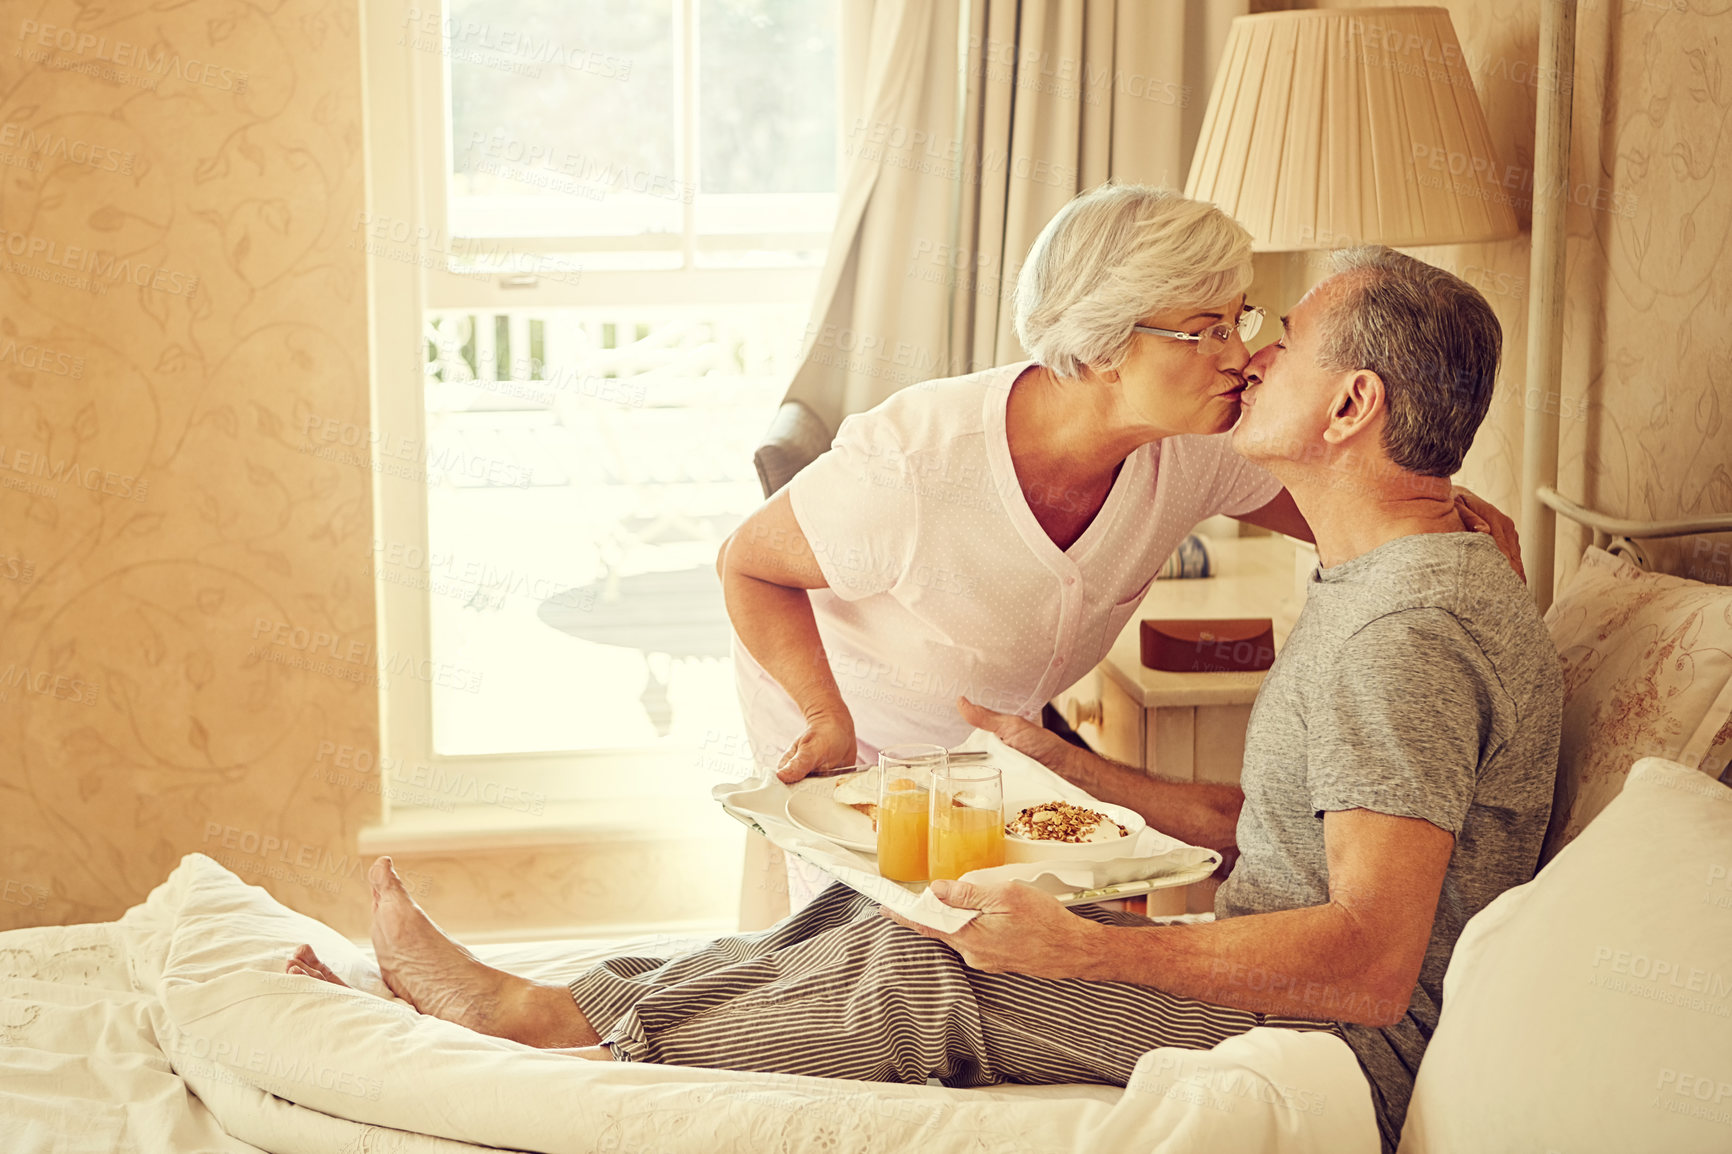 Buy stock photo Shot of a senior woman bringing breakfast in bed to her husband